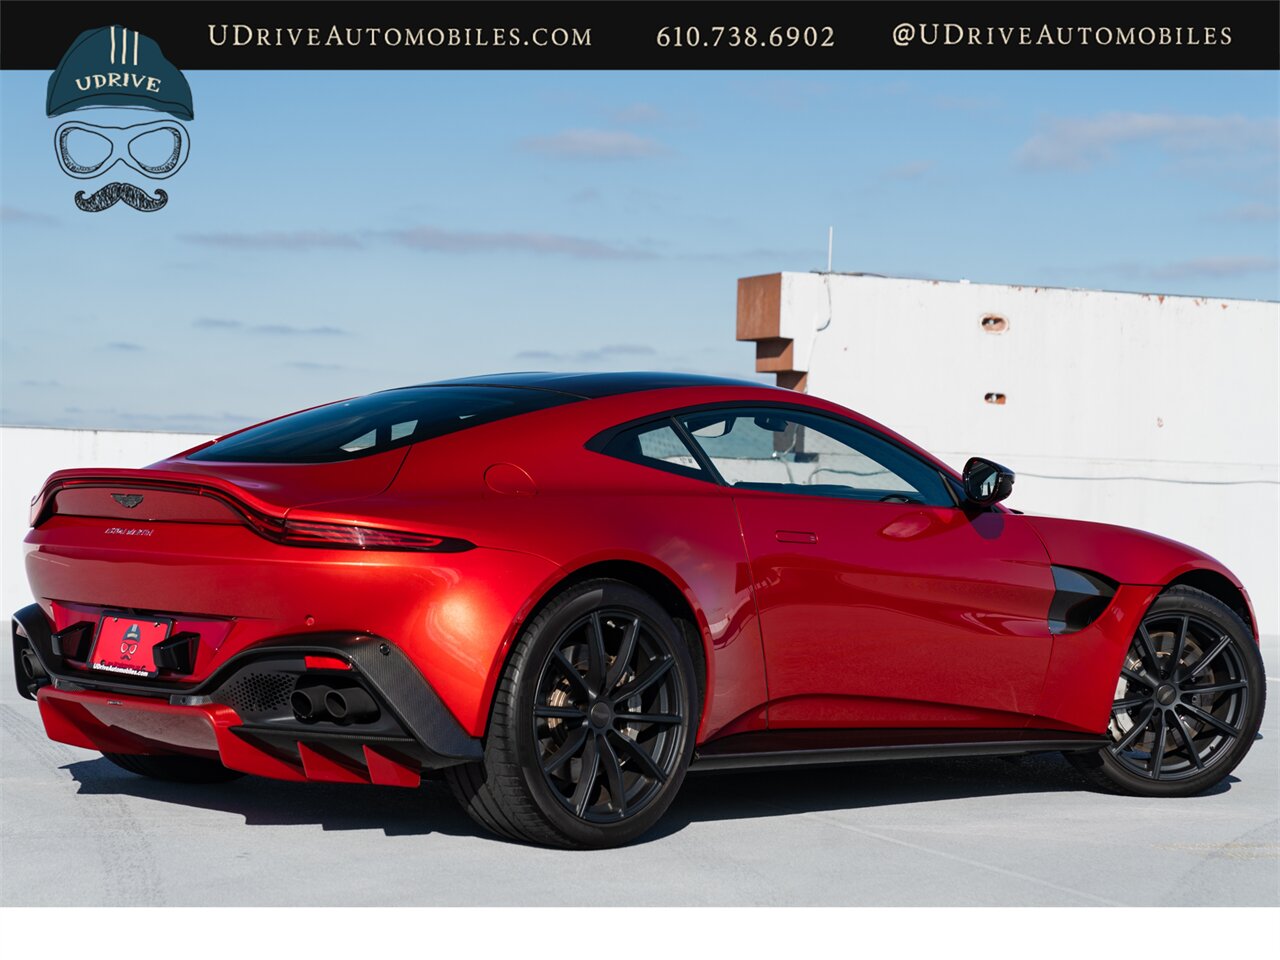 2019 Aston Martin Vantage  Incredibly Spec Rare Q Exclusive Fiamma Red $222k MSRP 1 of a Kind CPO - Photo 2 - West Chester, PA 19382